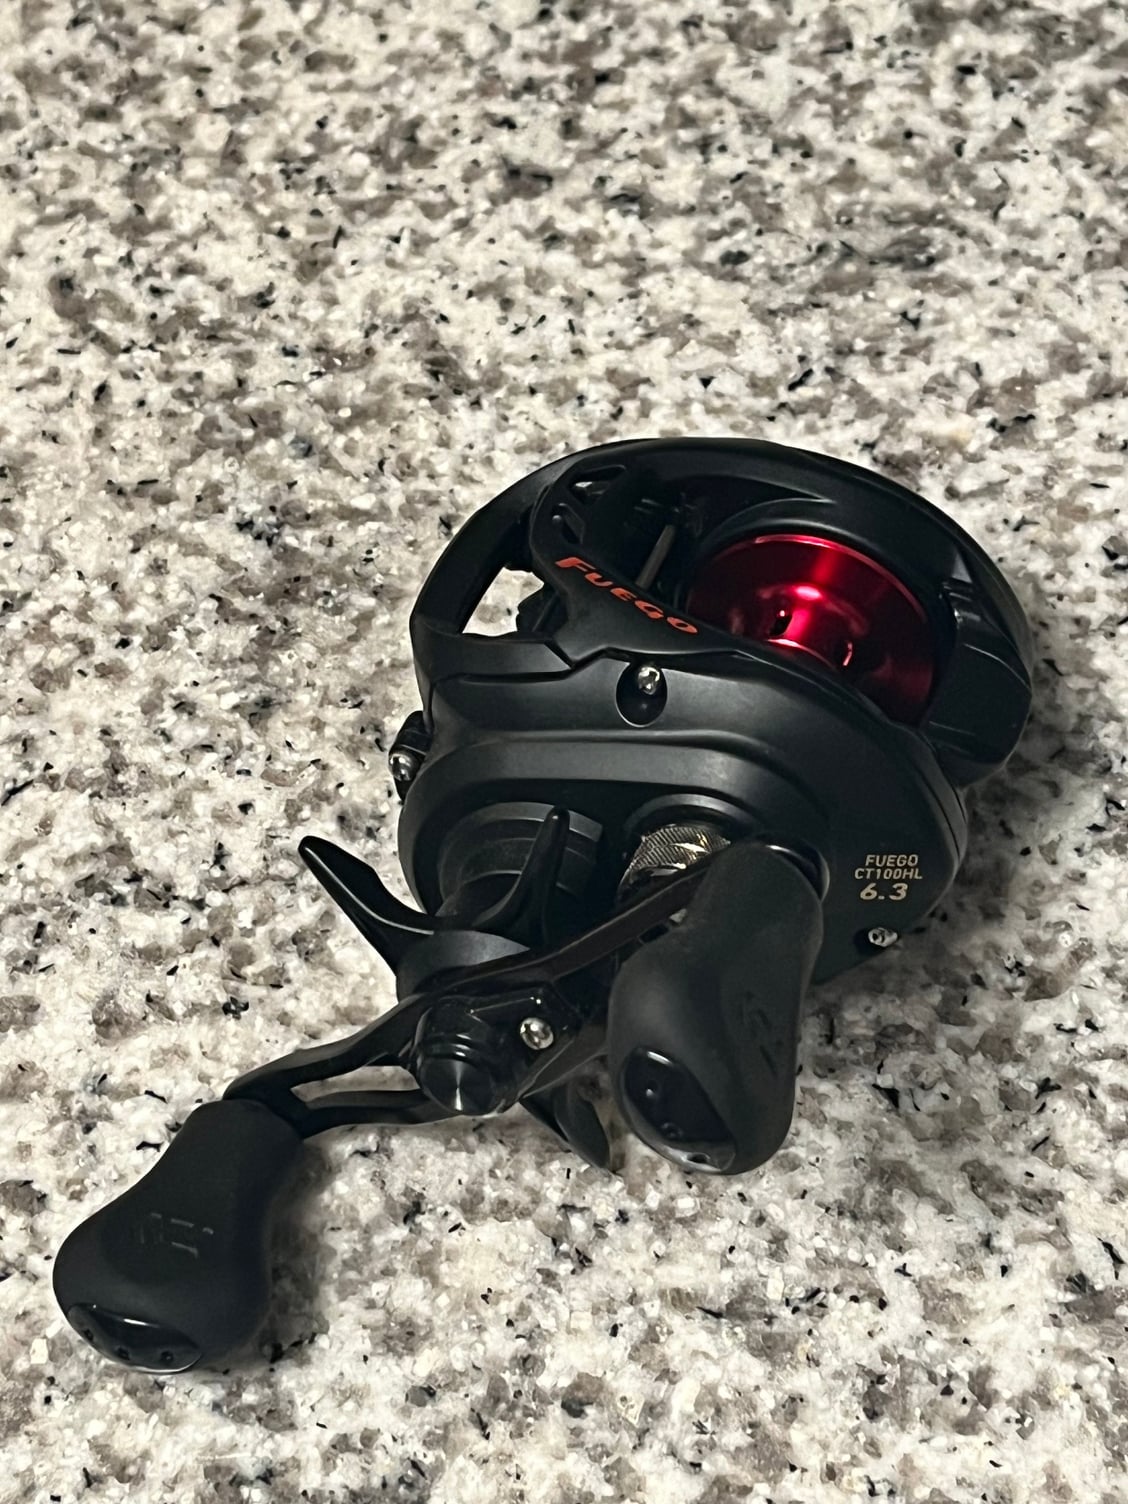 Baitcast Reels for sale- LH models - The Hull Truth - Boating and